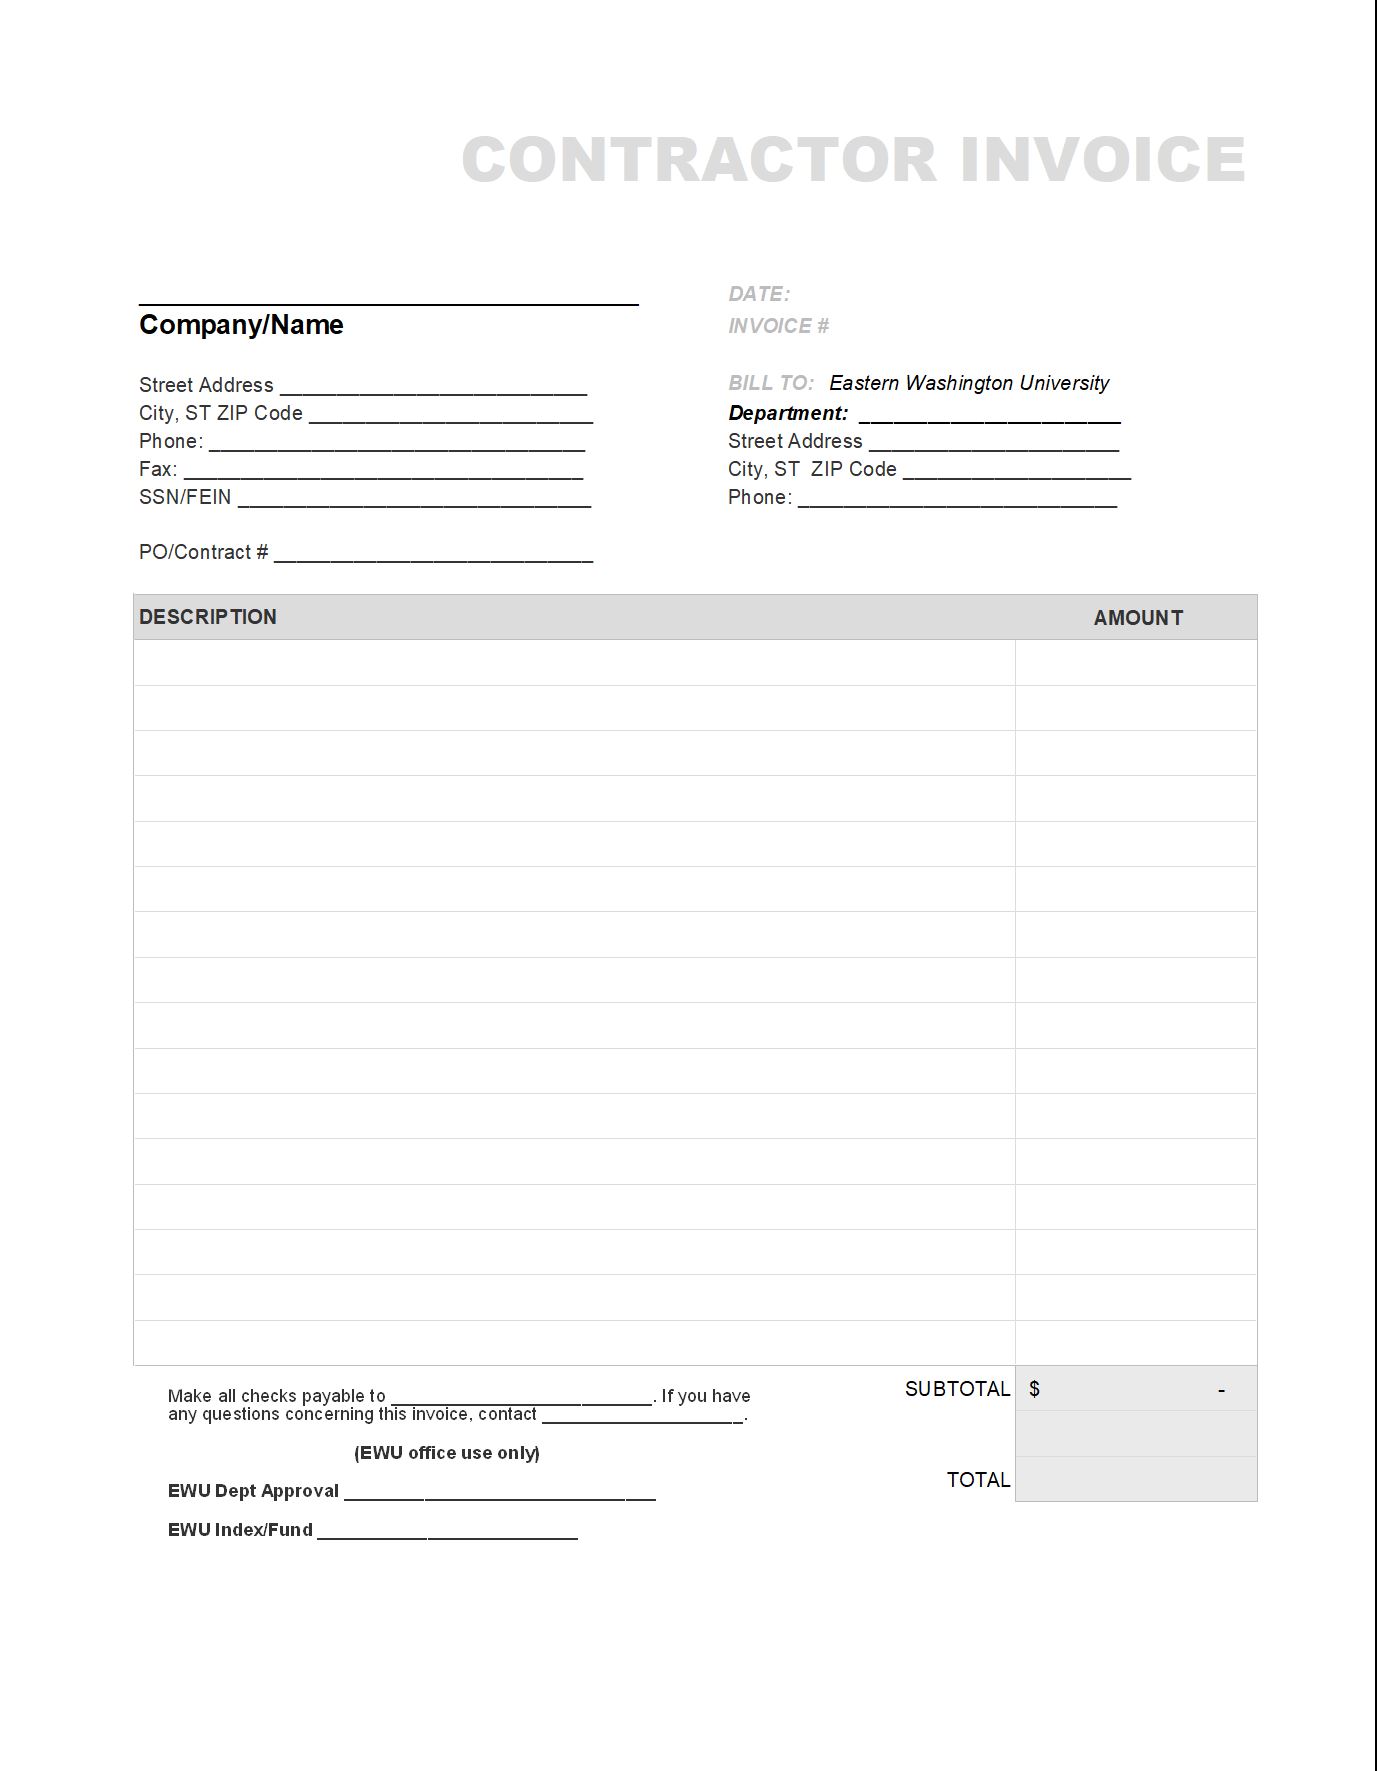 22 Independent Contractor Invoice Templates (FREE) Within Contractors Invoices Free Templates